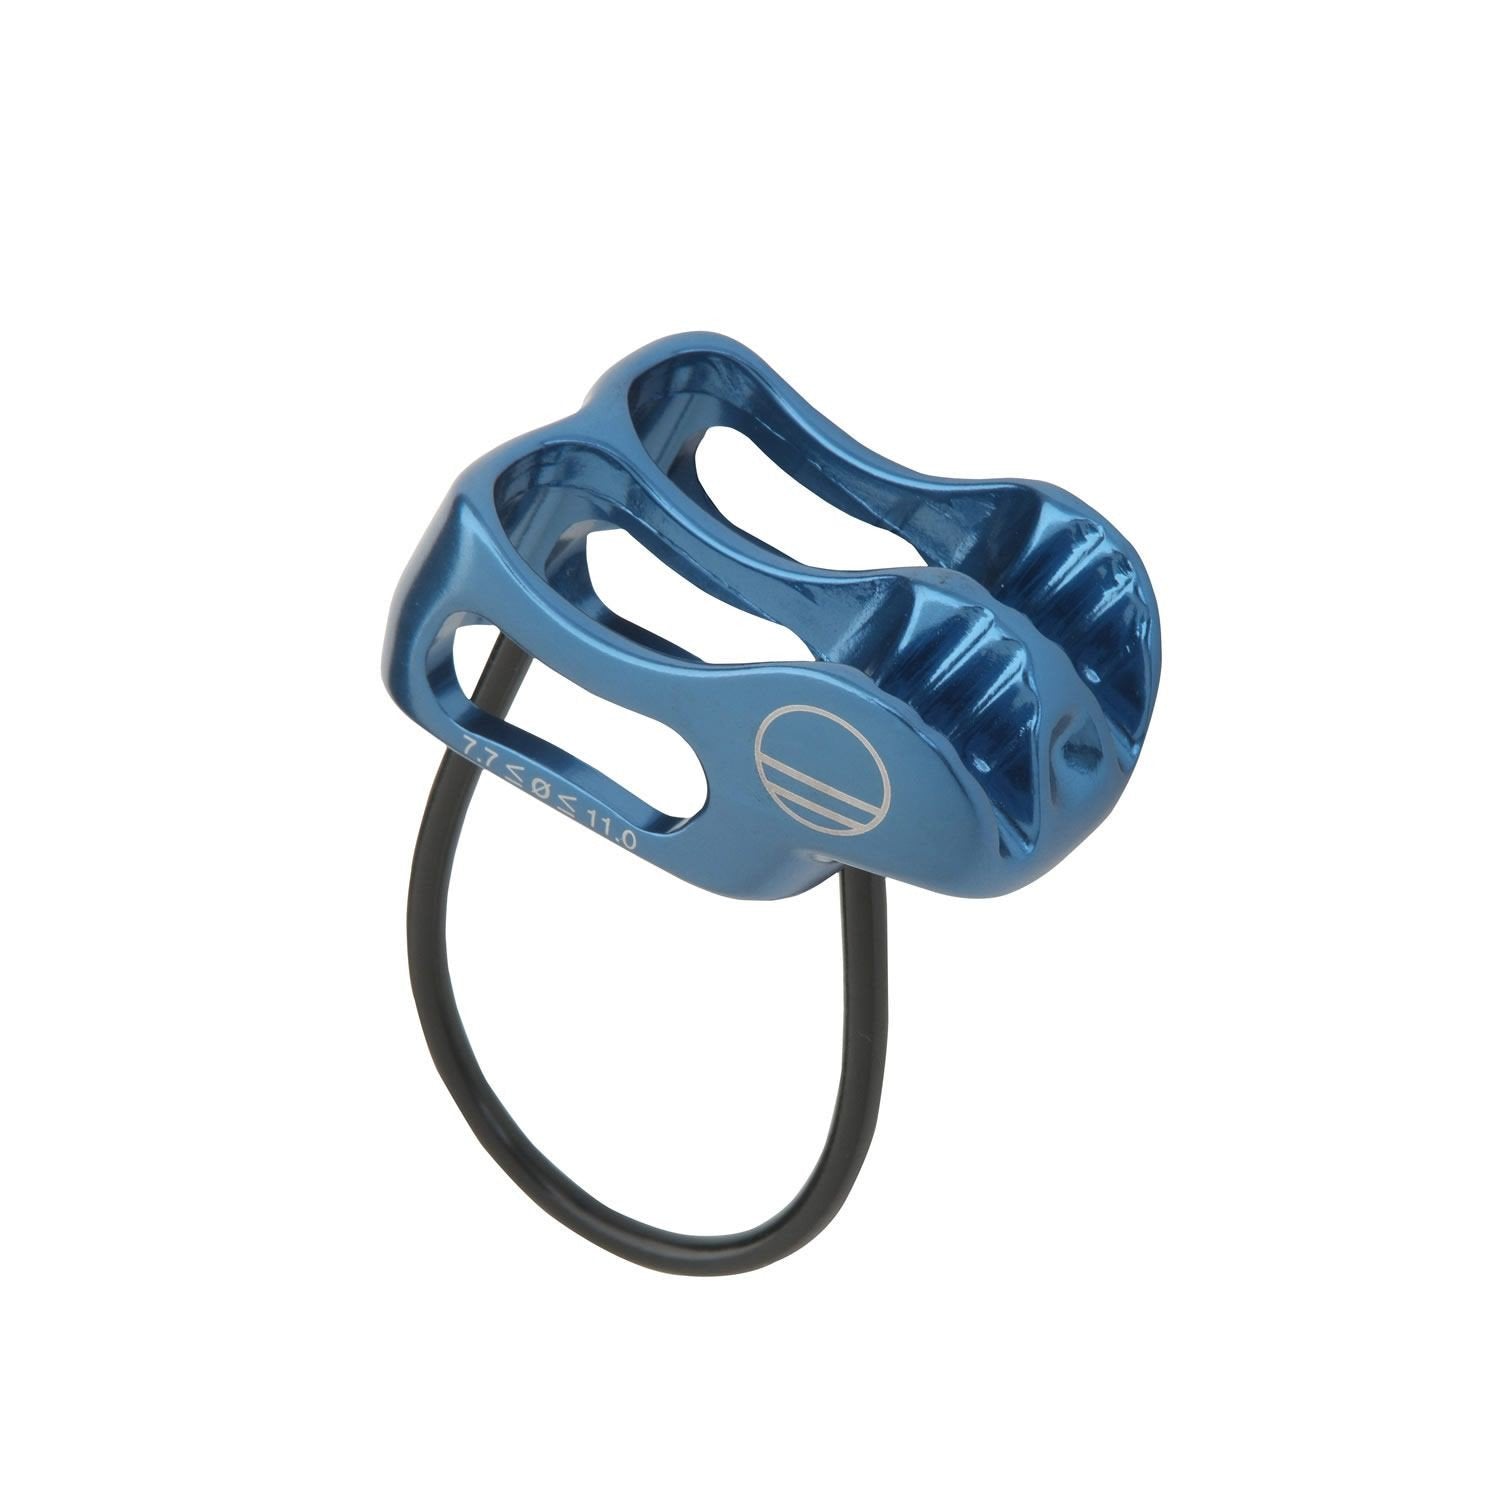 Belay Devices Tagged Out of Stock-Jun - Rock+Run